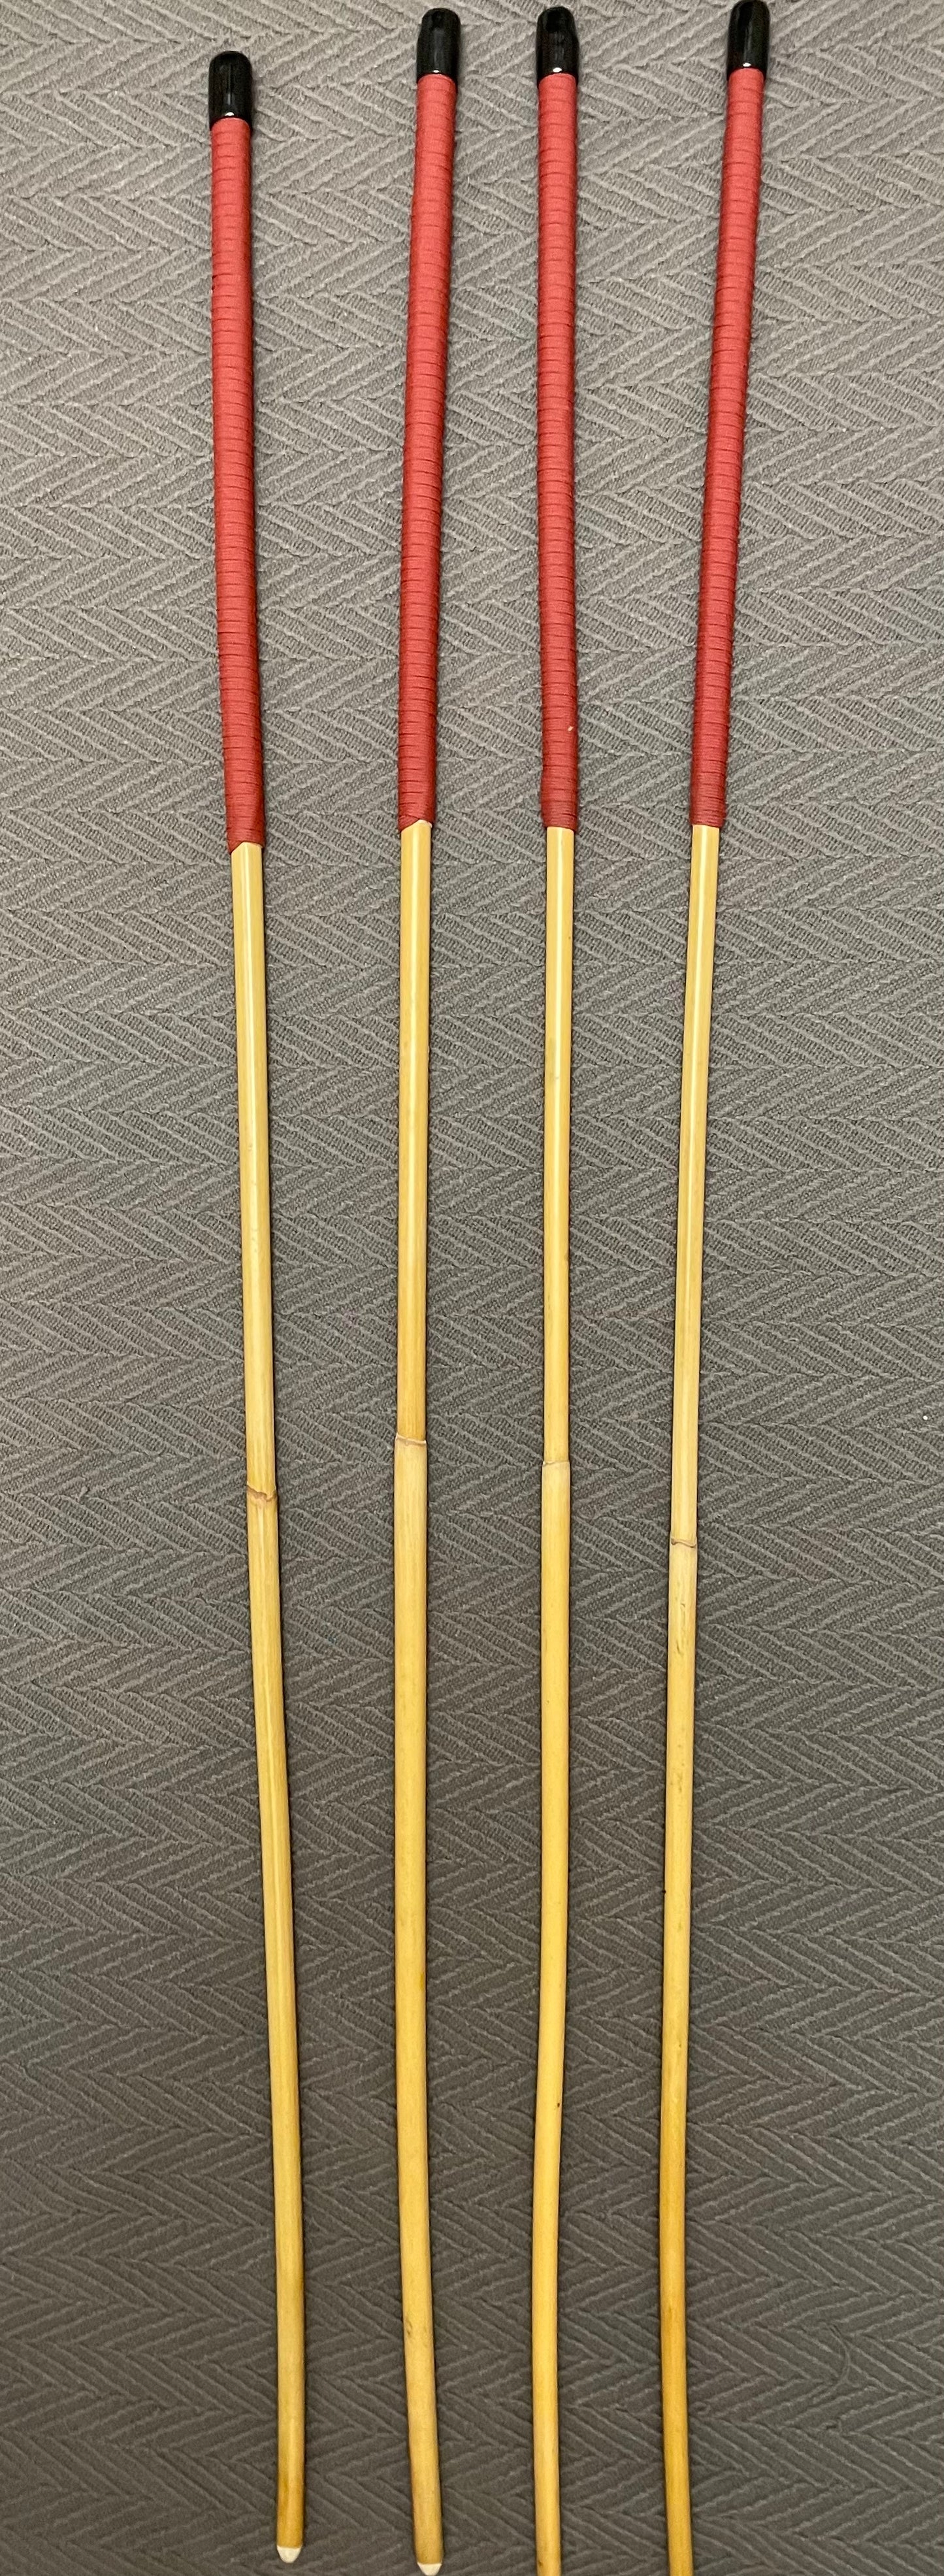 Thick and Thuddy Set of 4 Classsic Dragon Canes / Punishment Canes - 100 cms Length -RED Paracord Handles